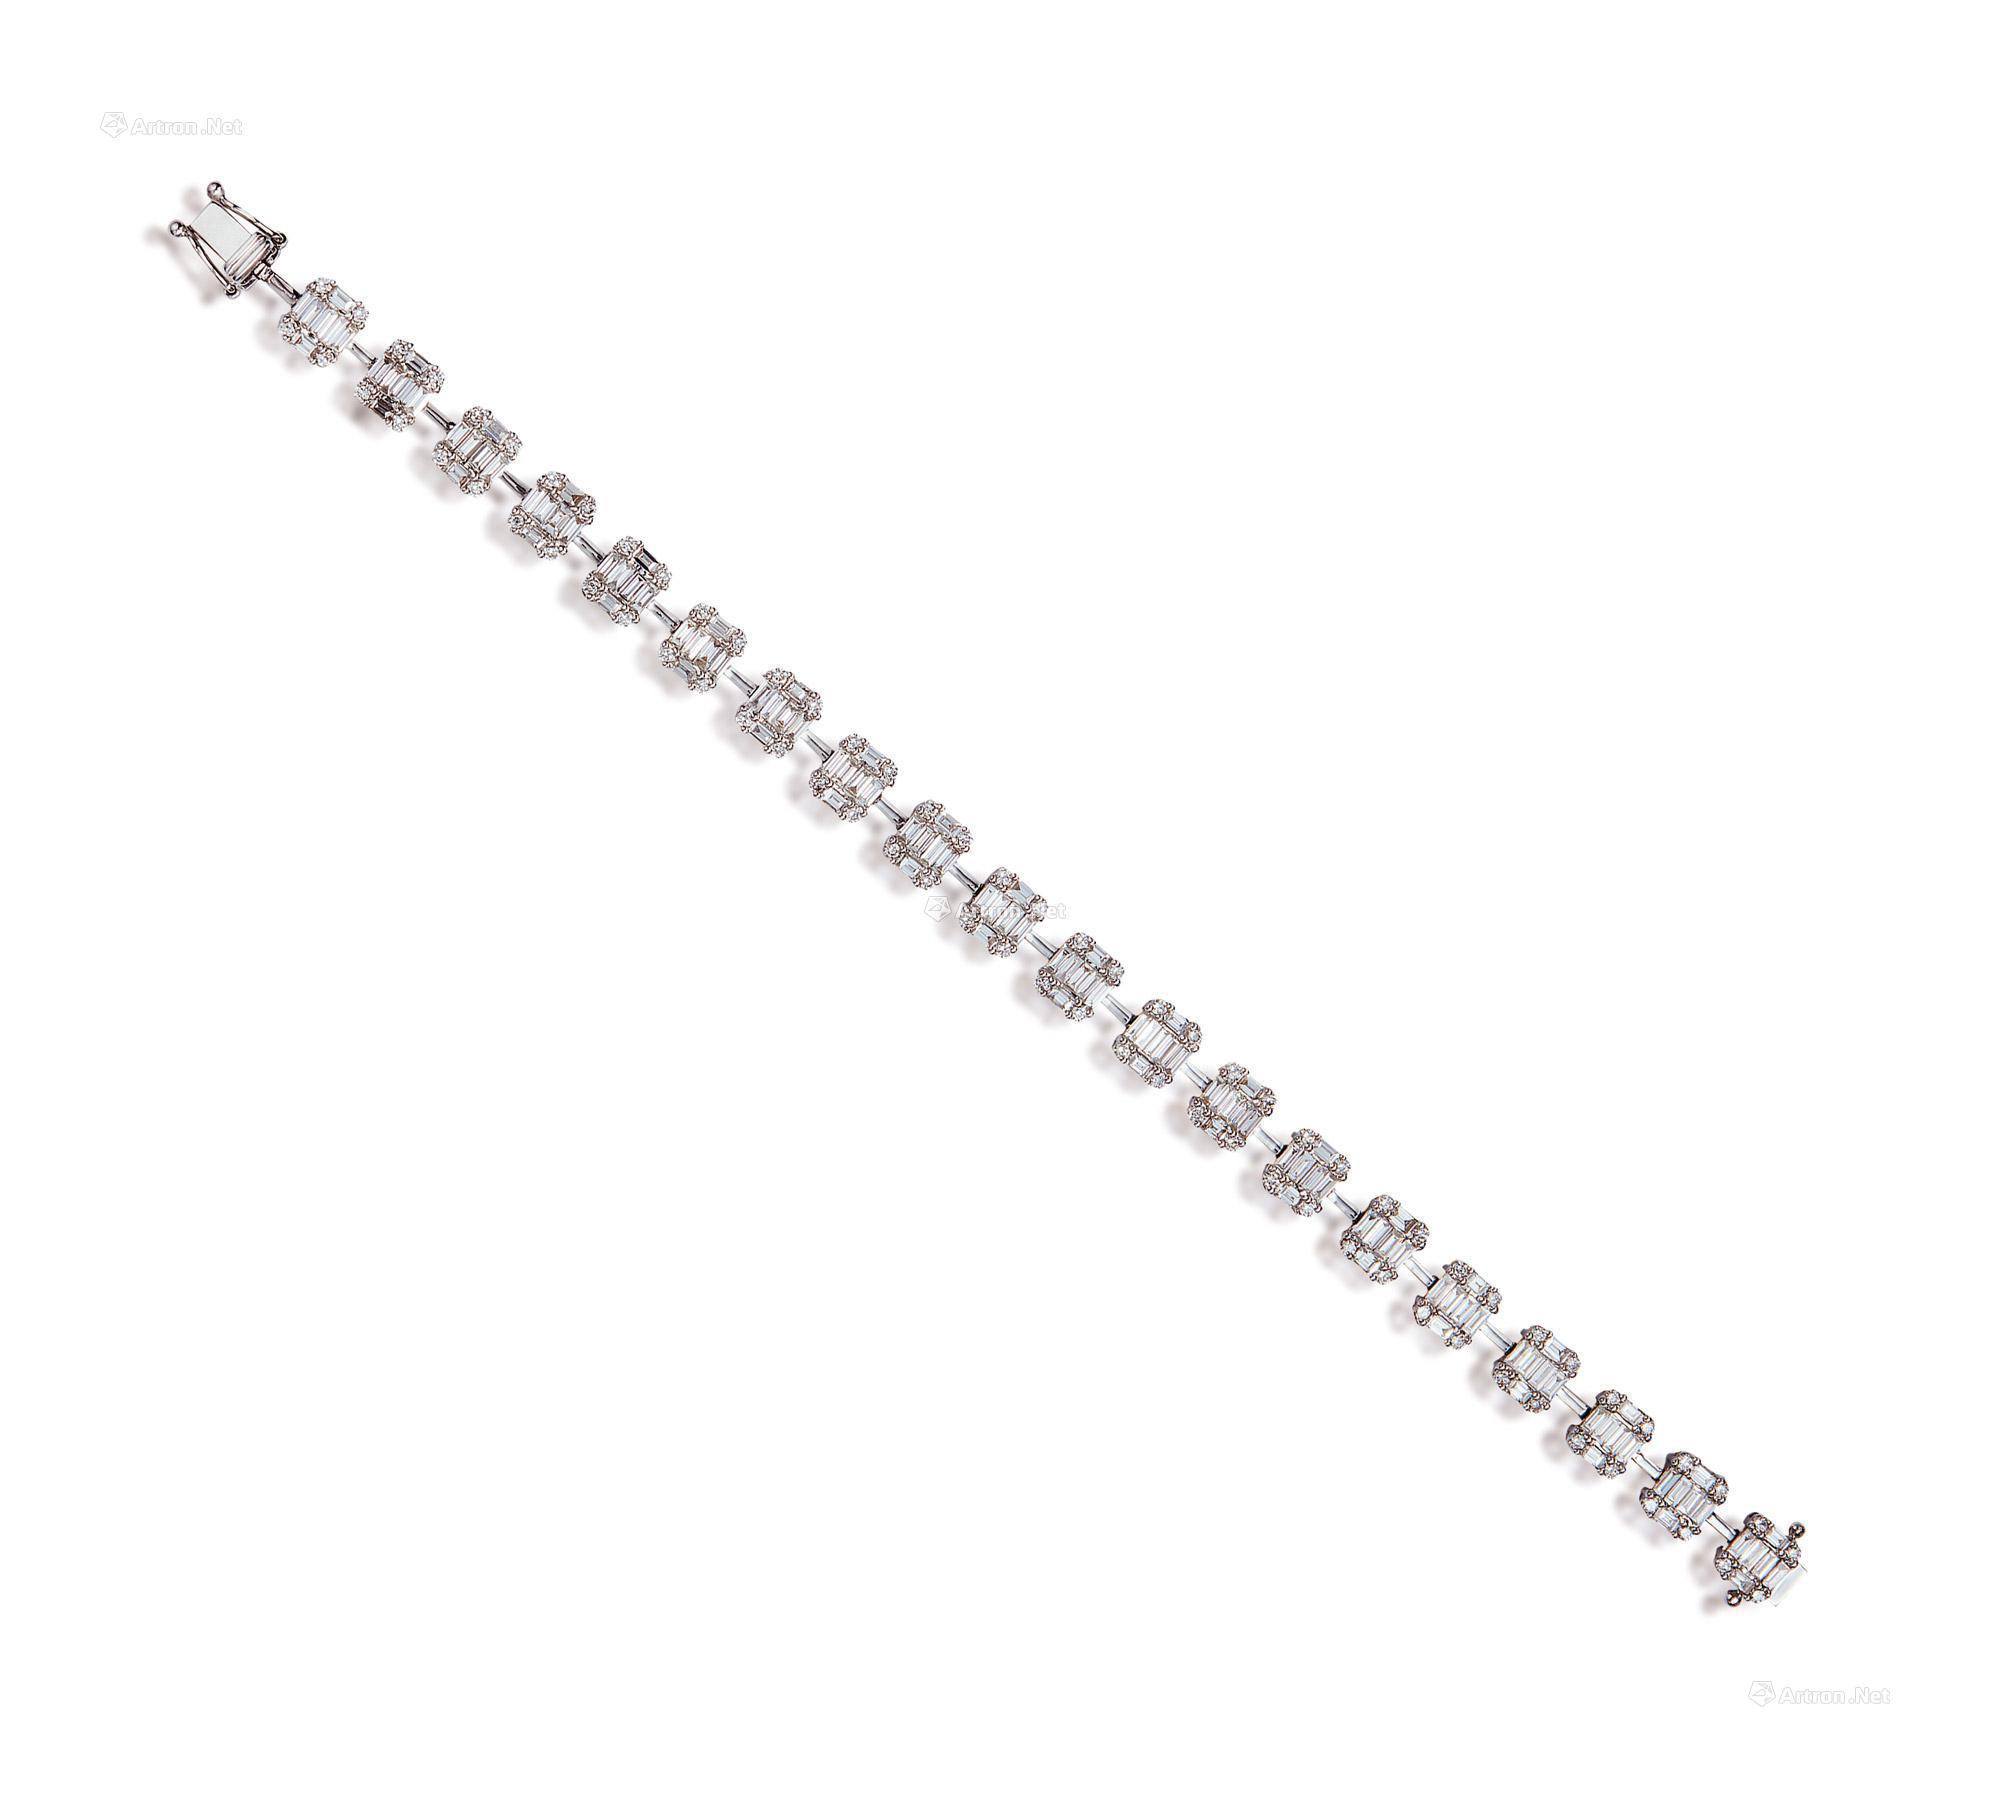 AN ALTOGETHER WEIGHING 4.12 CARATS DIAMOND BRACELET MOUNTED IN 18K WHITE GOLD